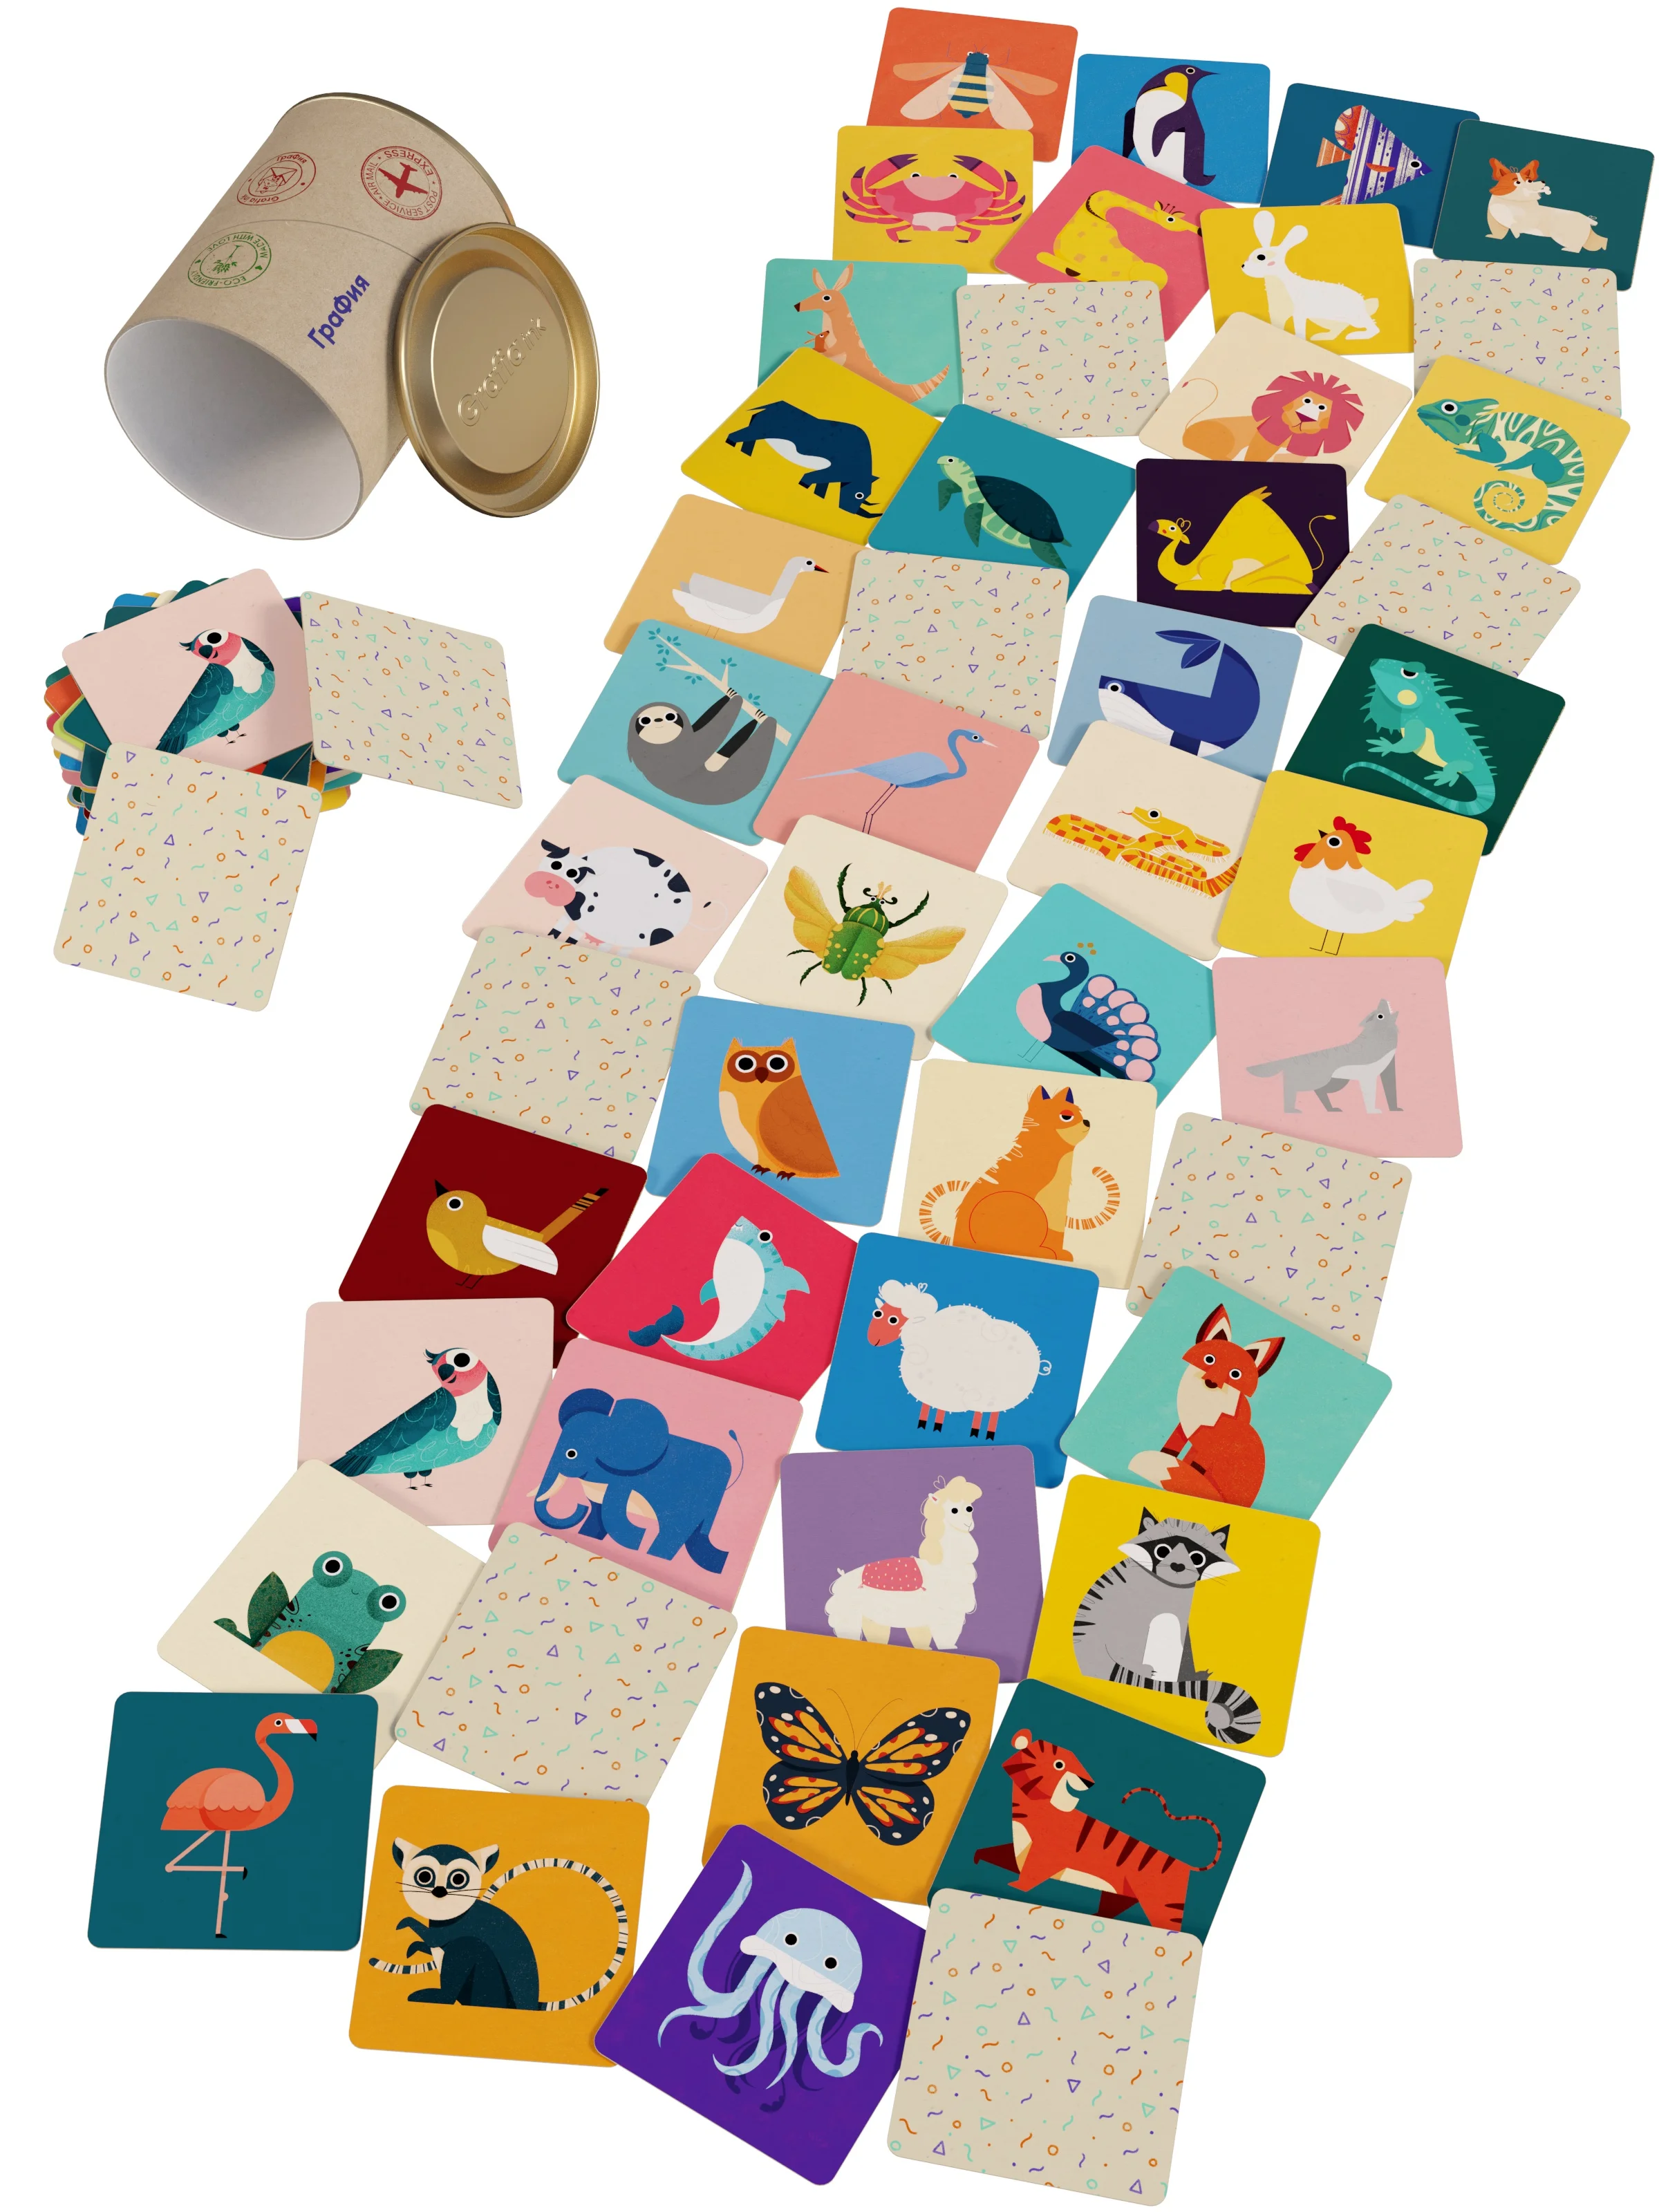 Memory Matching 48 Pairs flashcards Smart Board Game for Kids Age 4+ Grafia.ink Find Cute Zoo Cartoon Animals playing couple-cards in cardboard